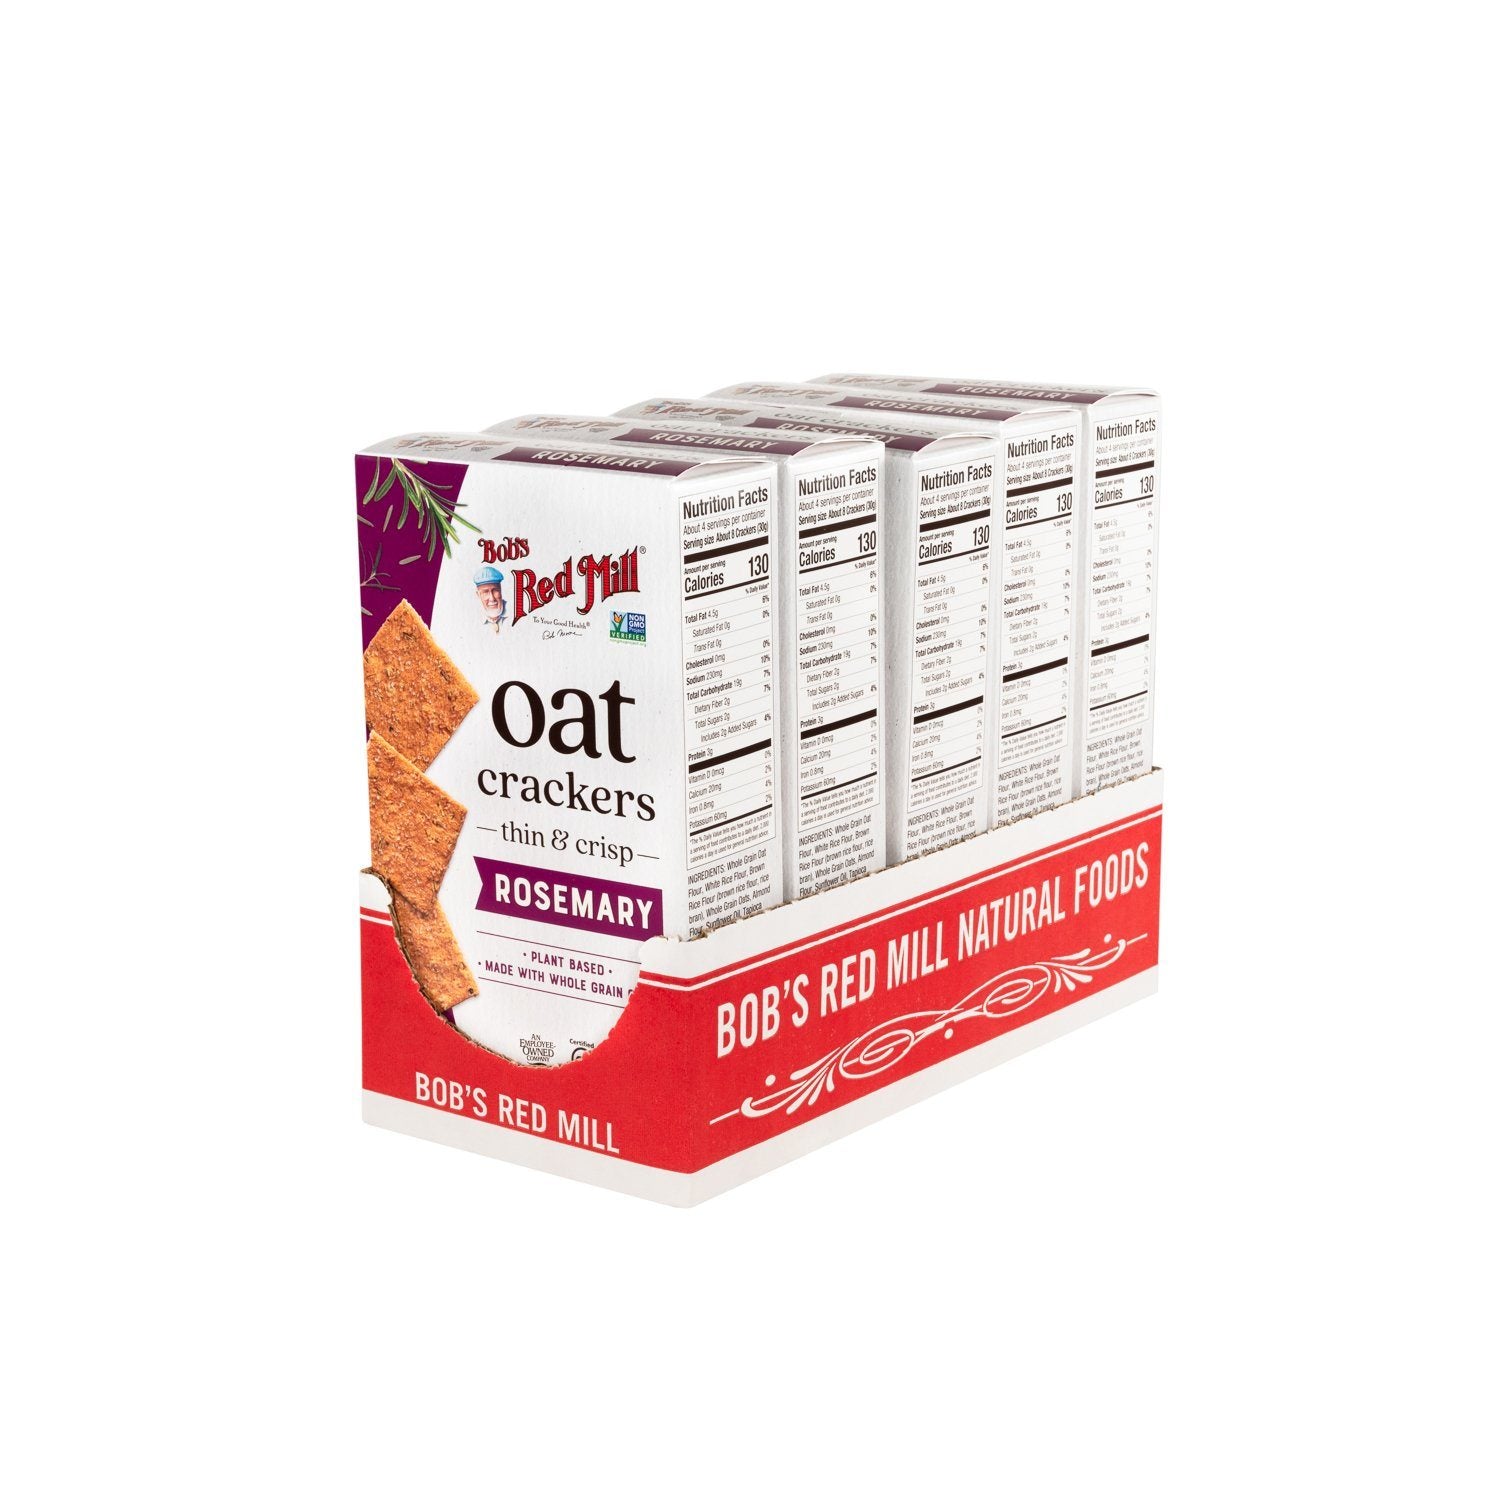 Bob's Red Mill Oat Crackers Bob's Red Mill Rosemary 4.25 Oz-5 Count 